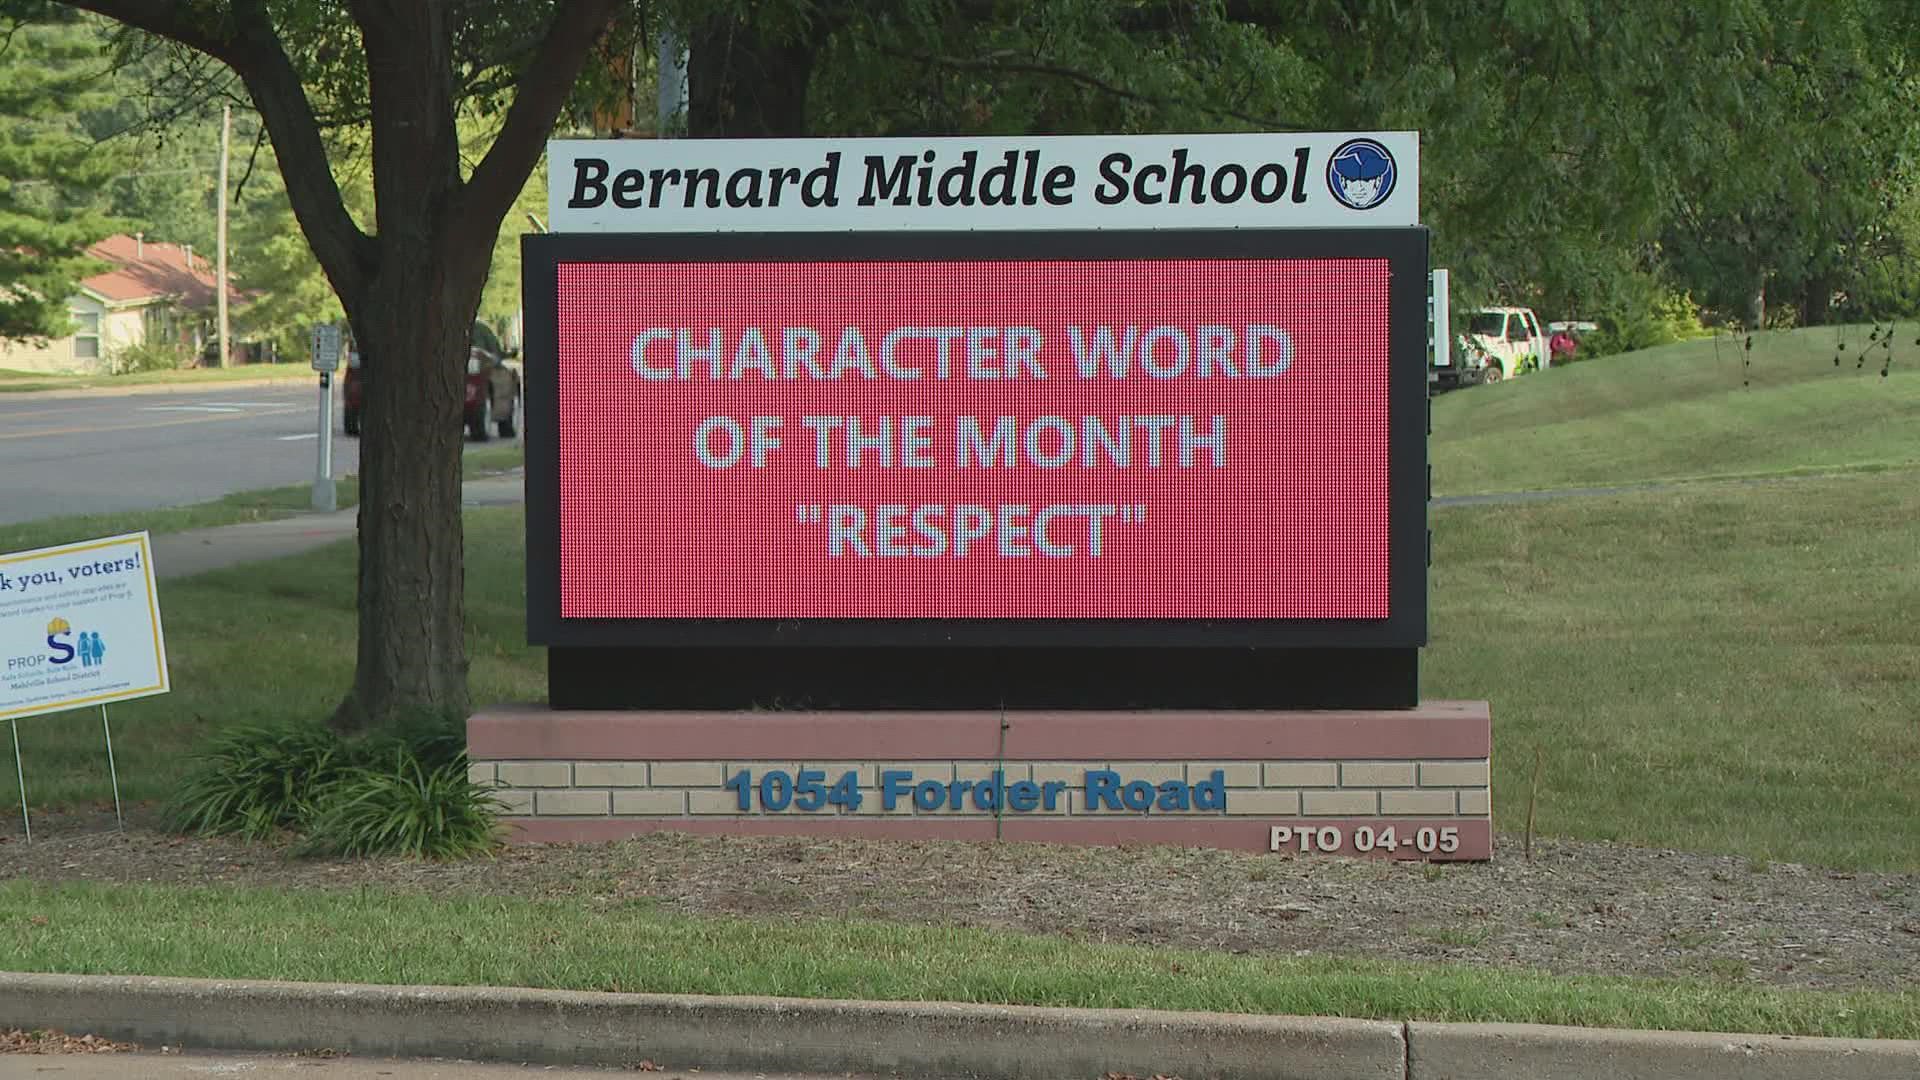 Police said Brandon Holbrook was a substitute teacher at Bernard Middle School when he first met the victim. They believe he then groomed her over social media.